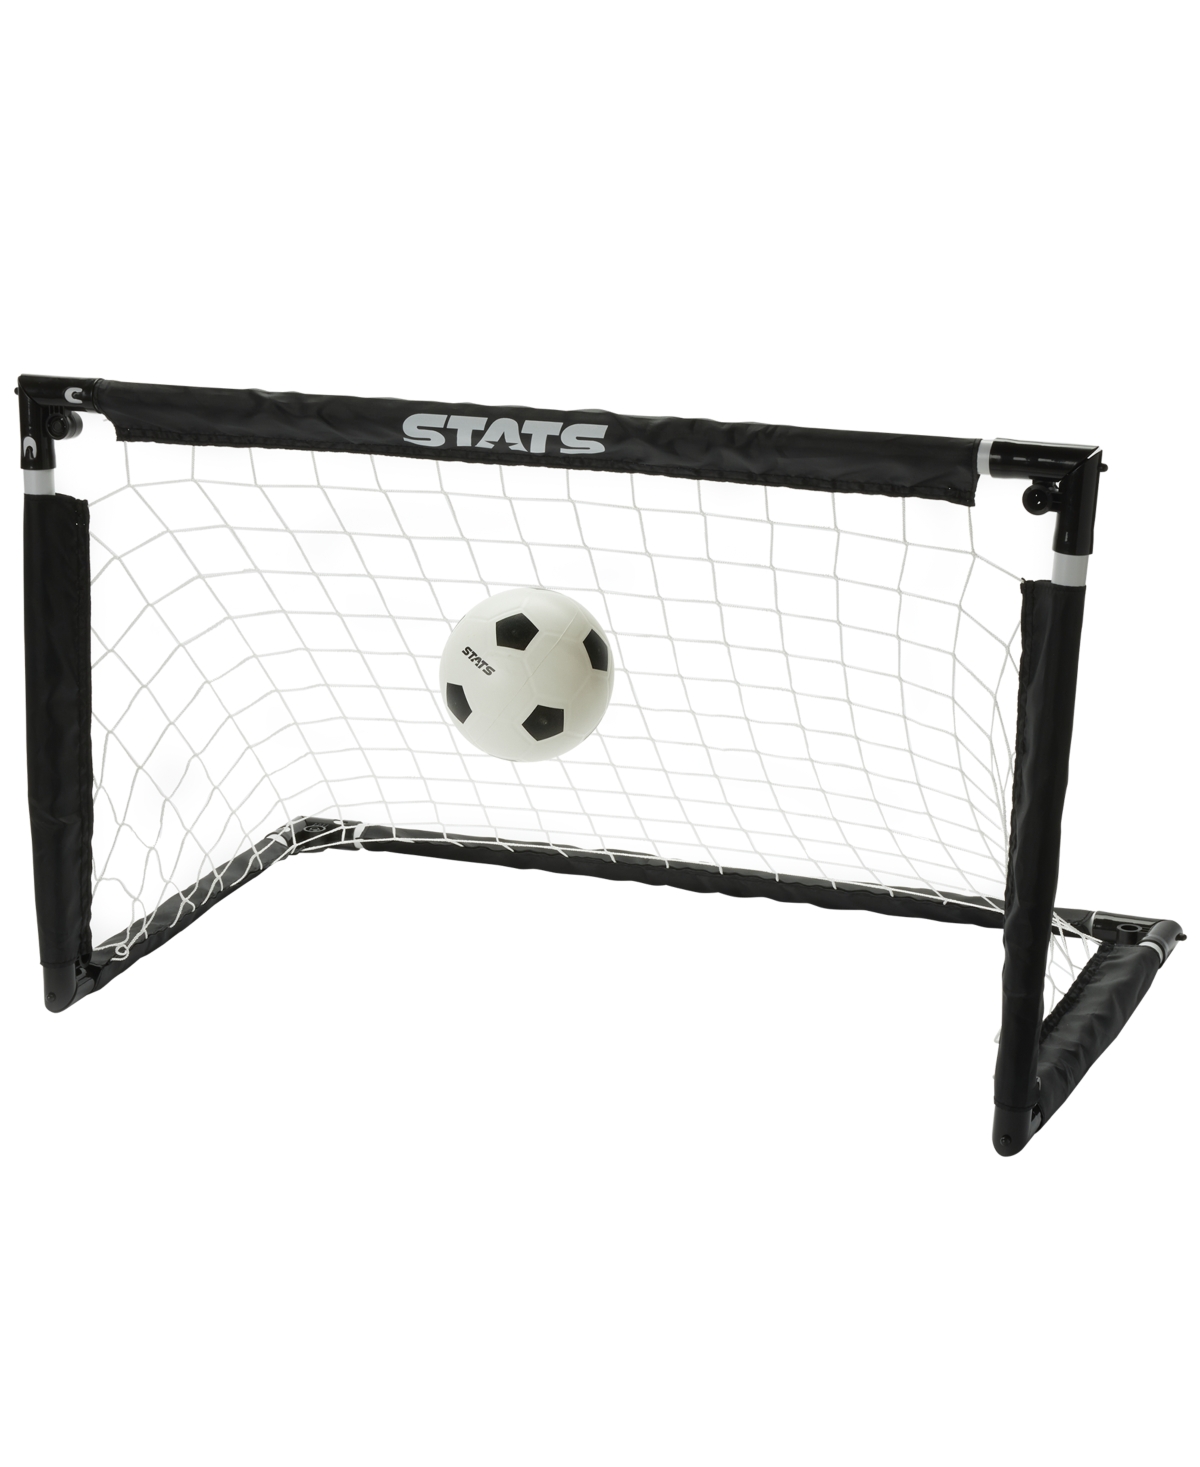 Stats Soccer Goal, Ball And Pump Set In Multi